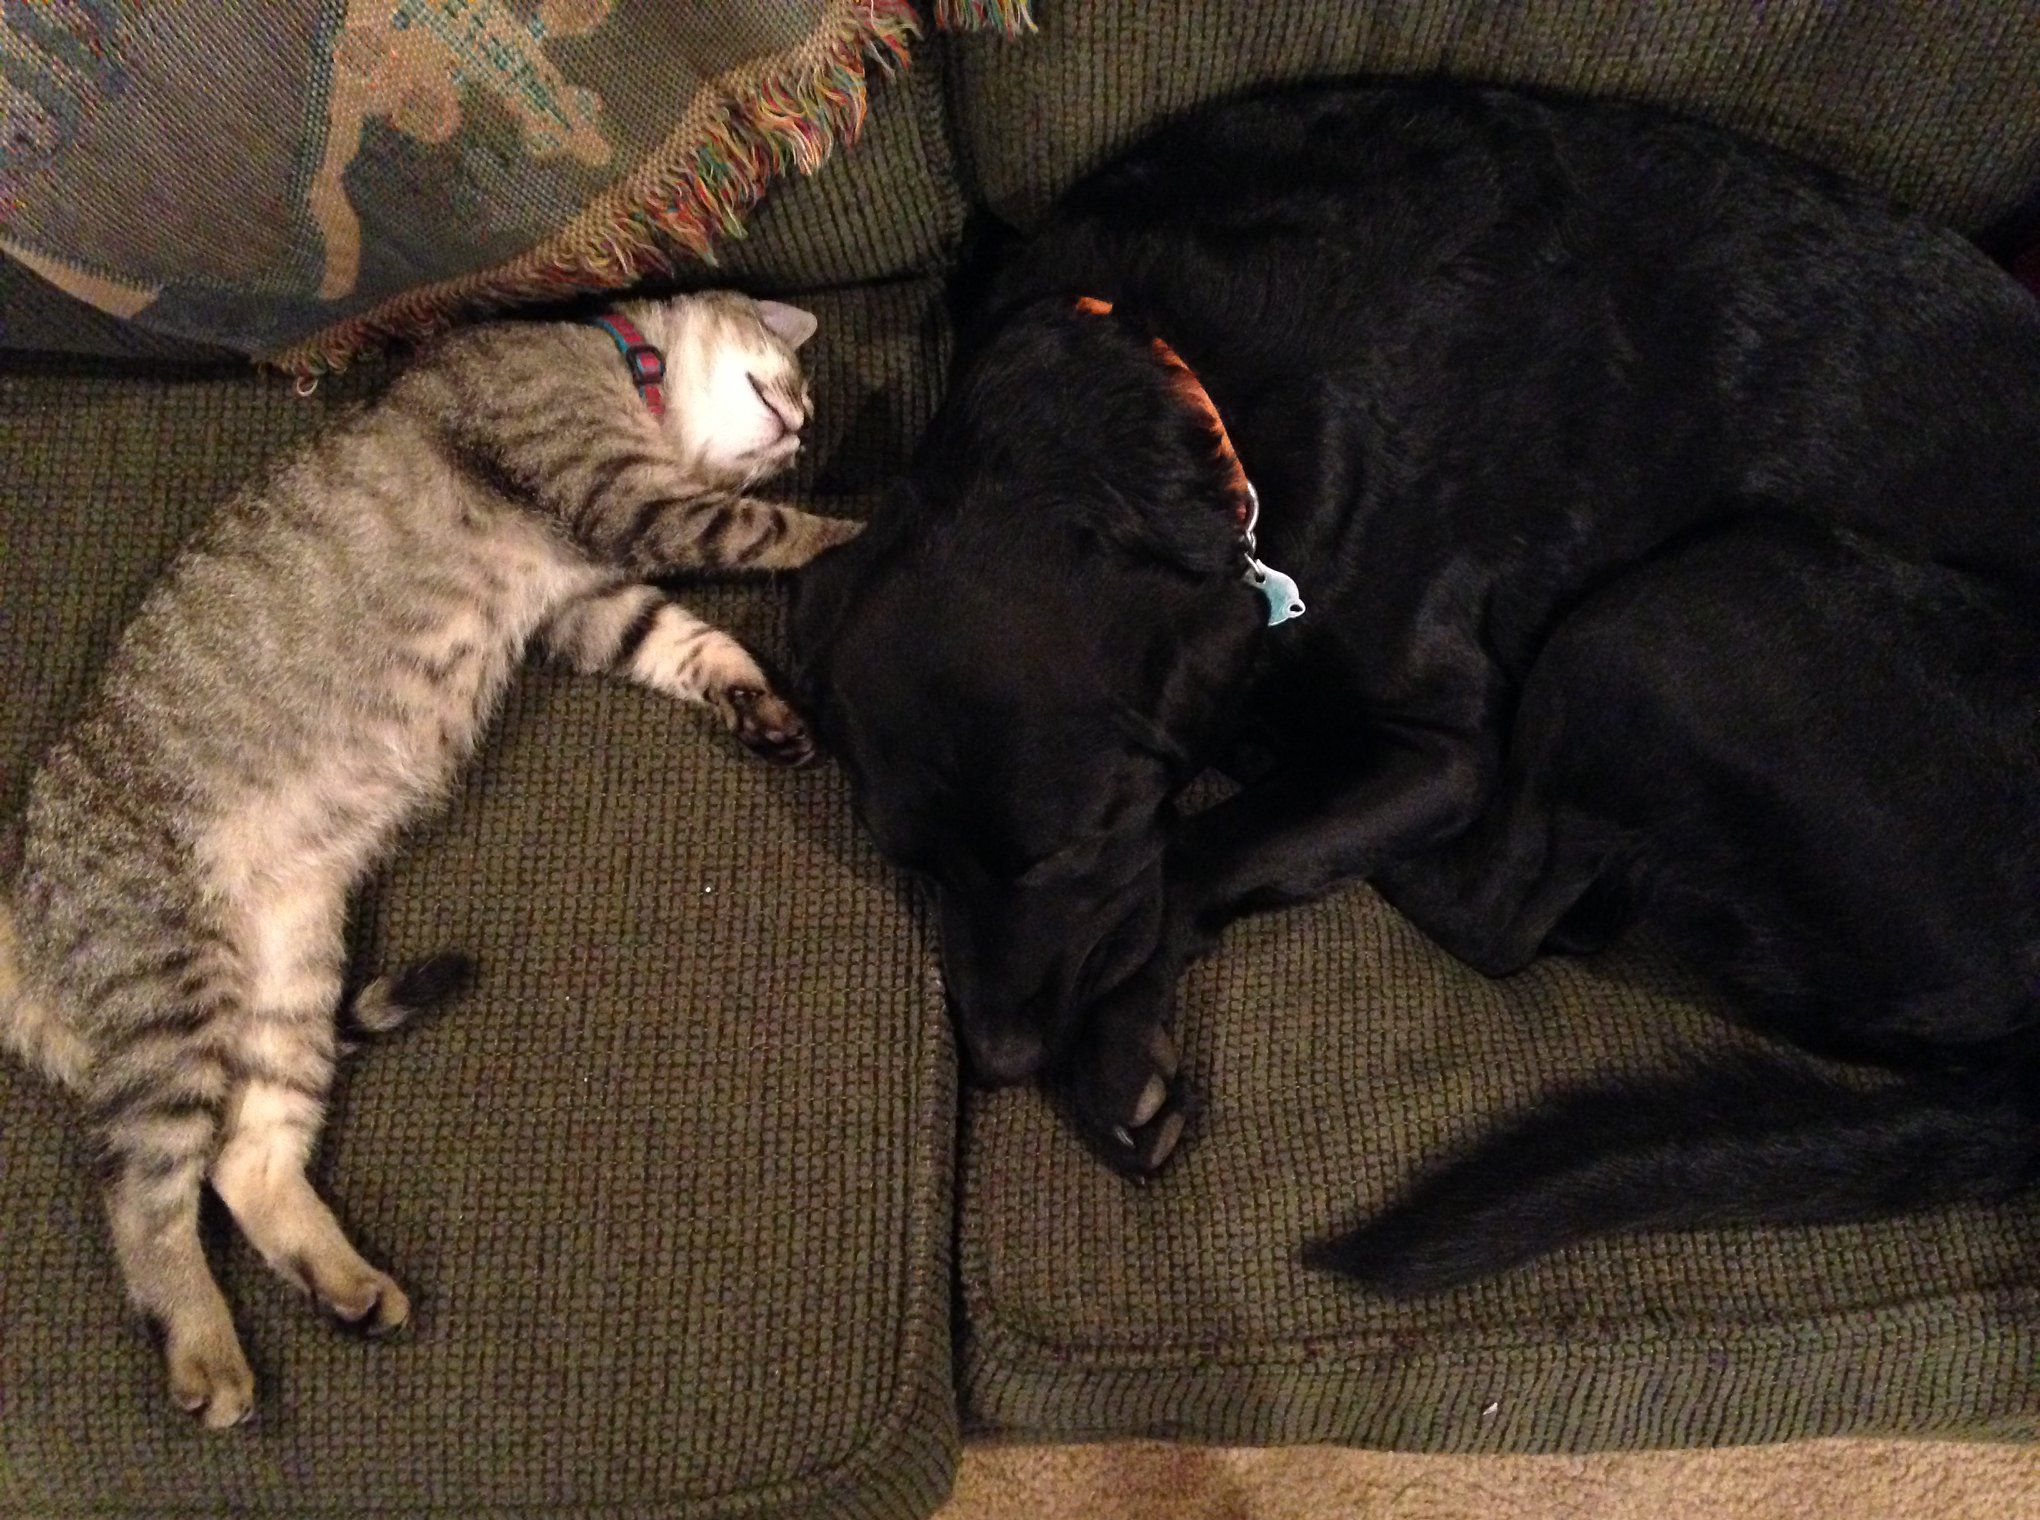 tabby cat and black dog nap together on couch